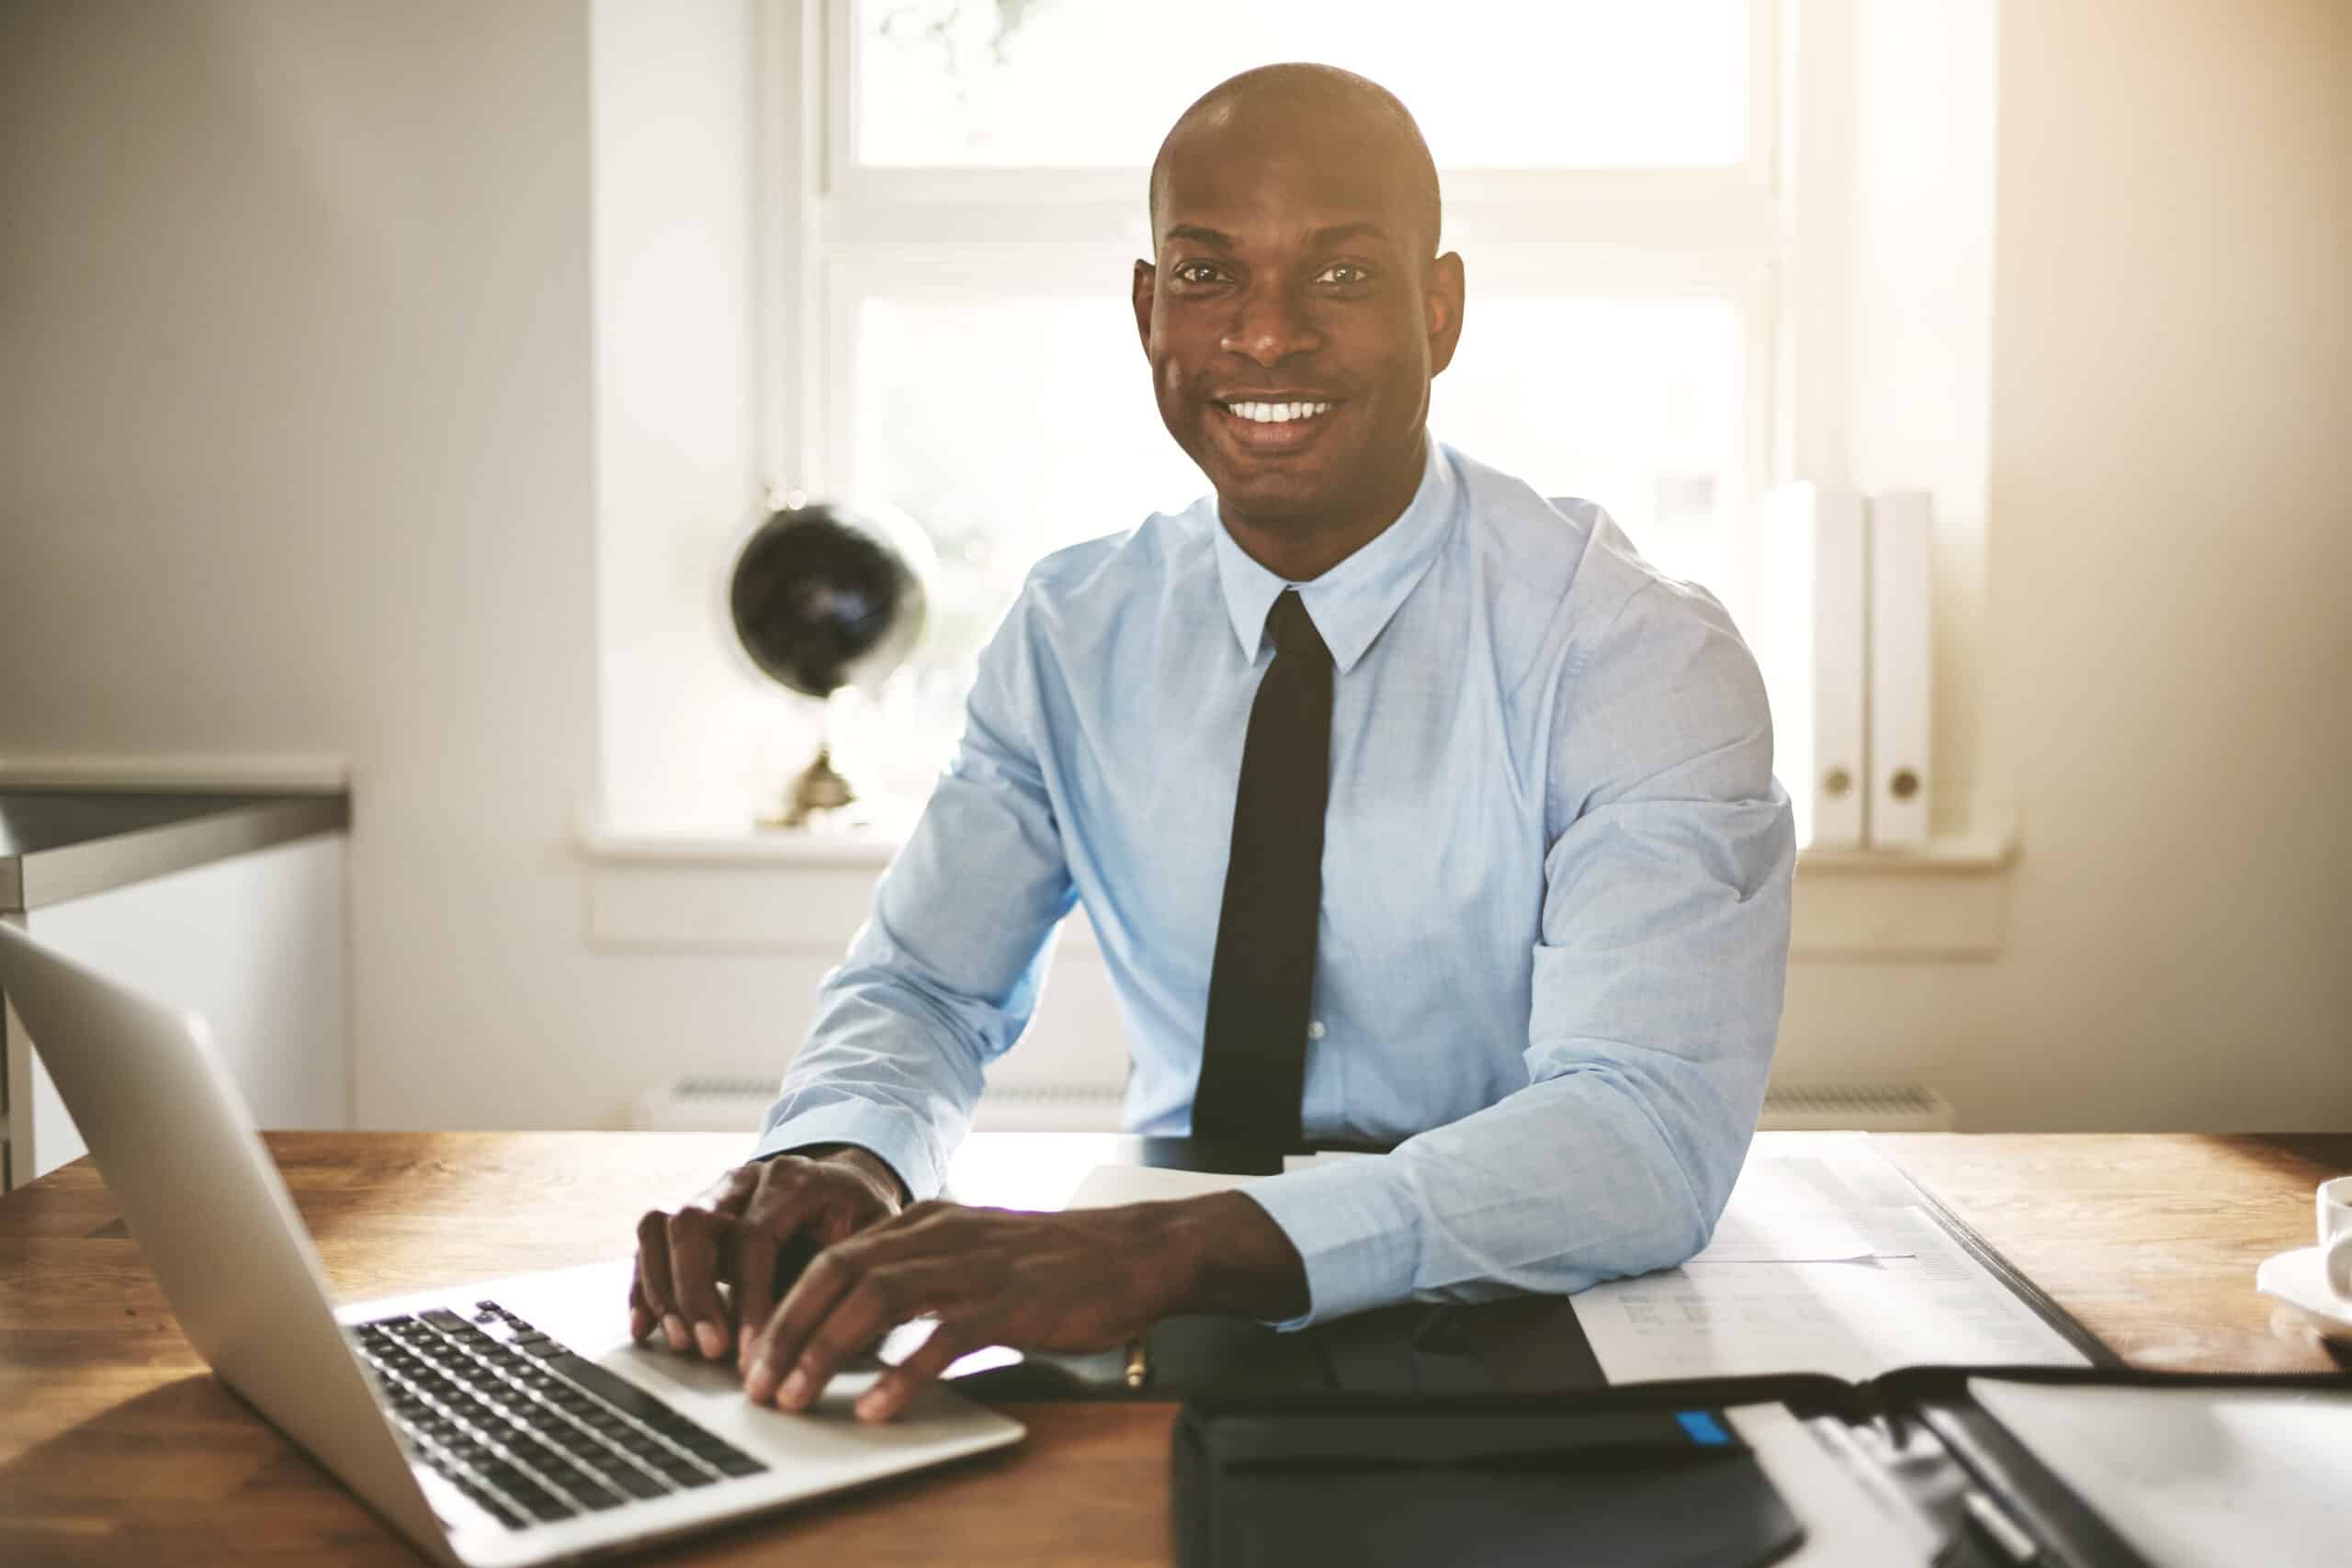 Successful young African businessman sitting at his desk in an office smiling and working on a laptop